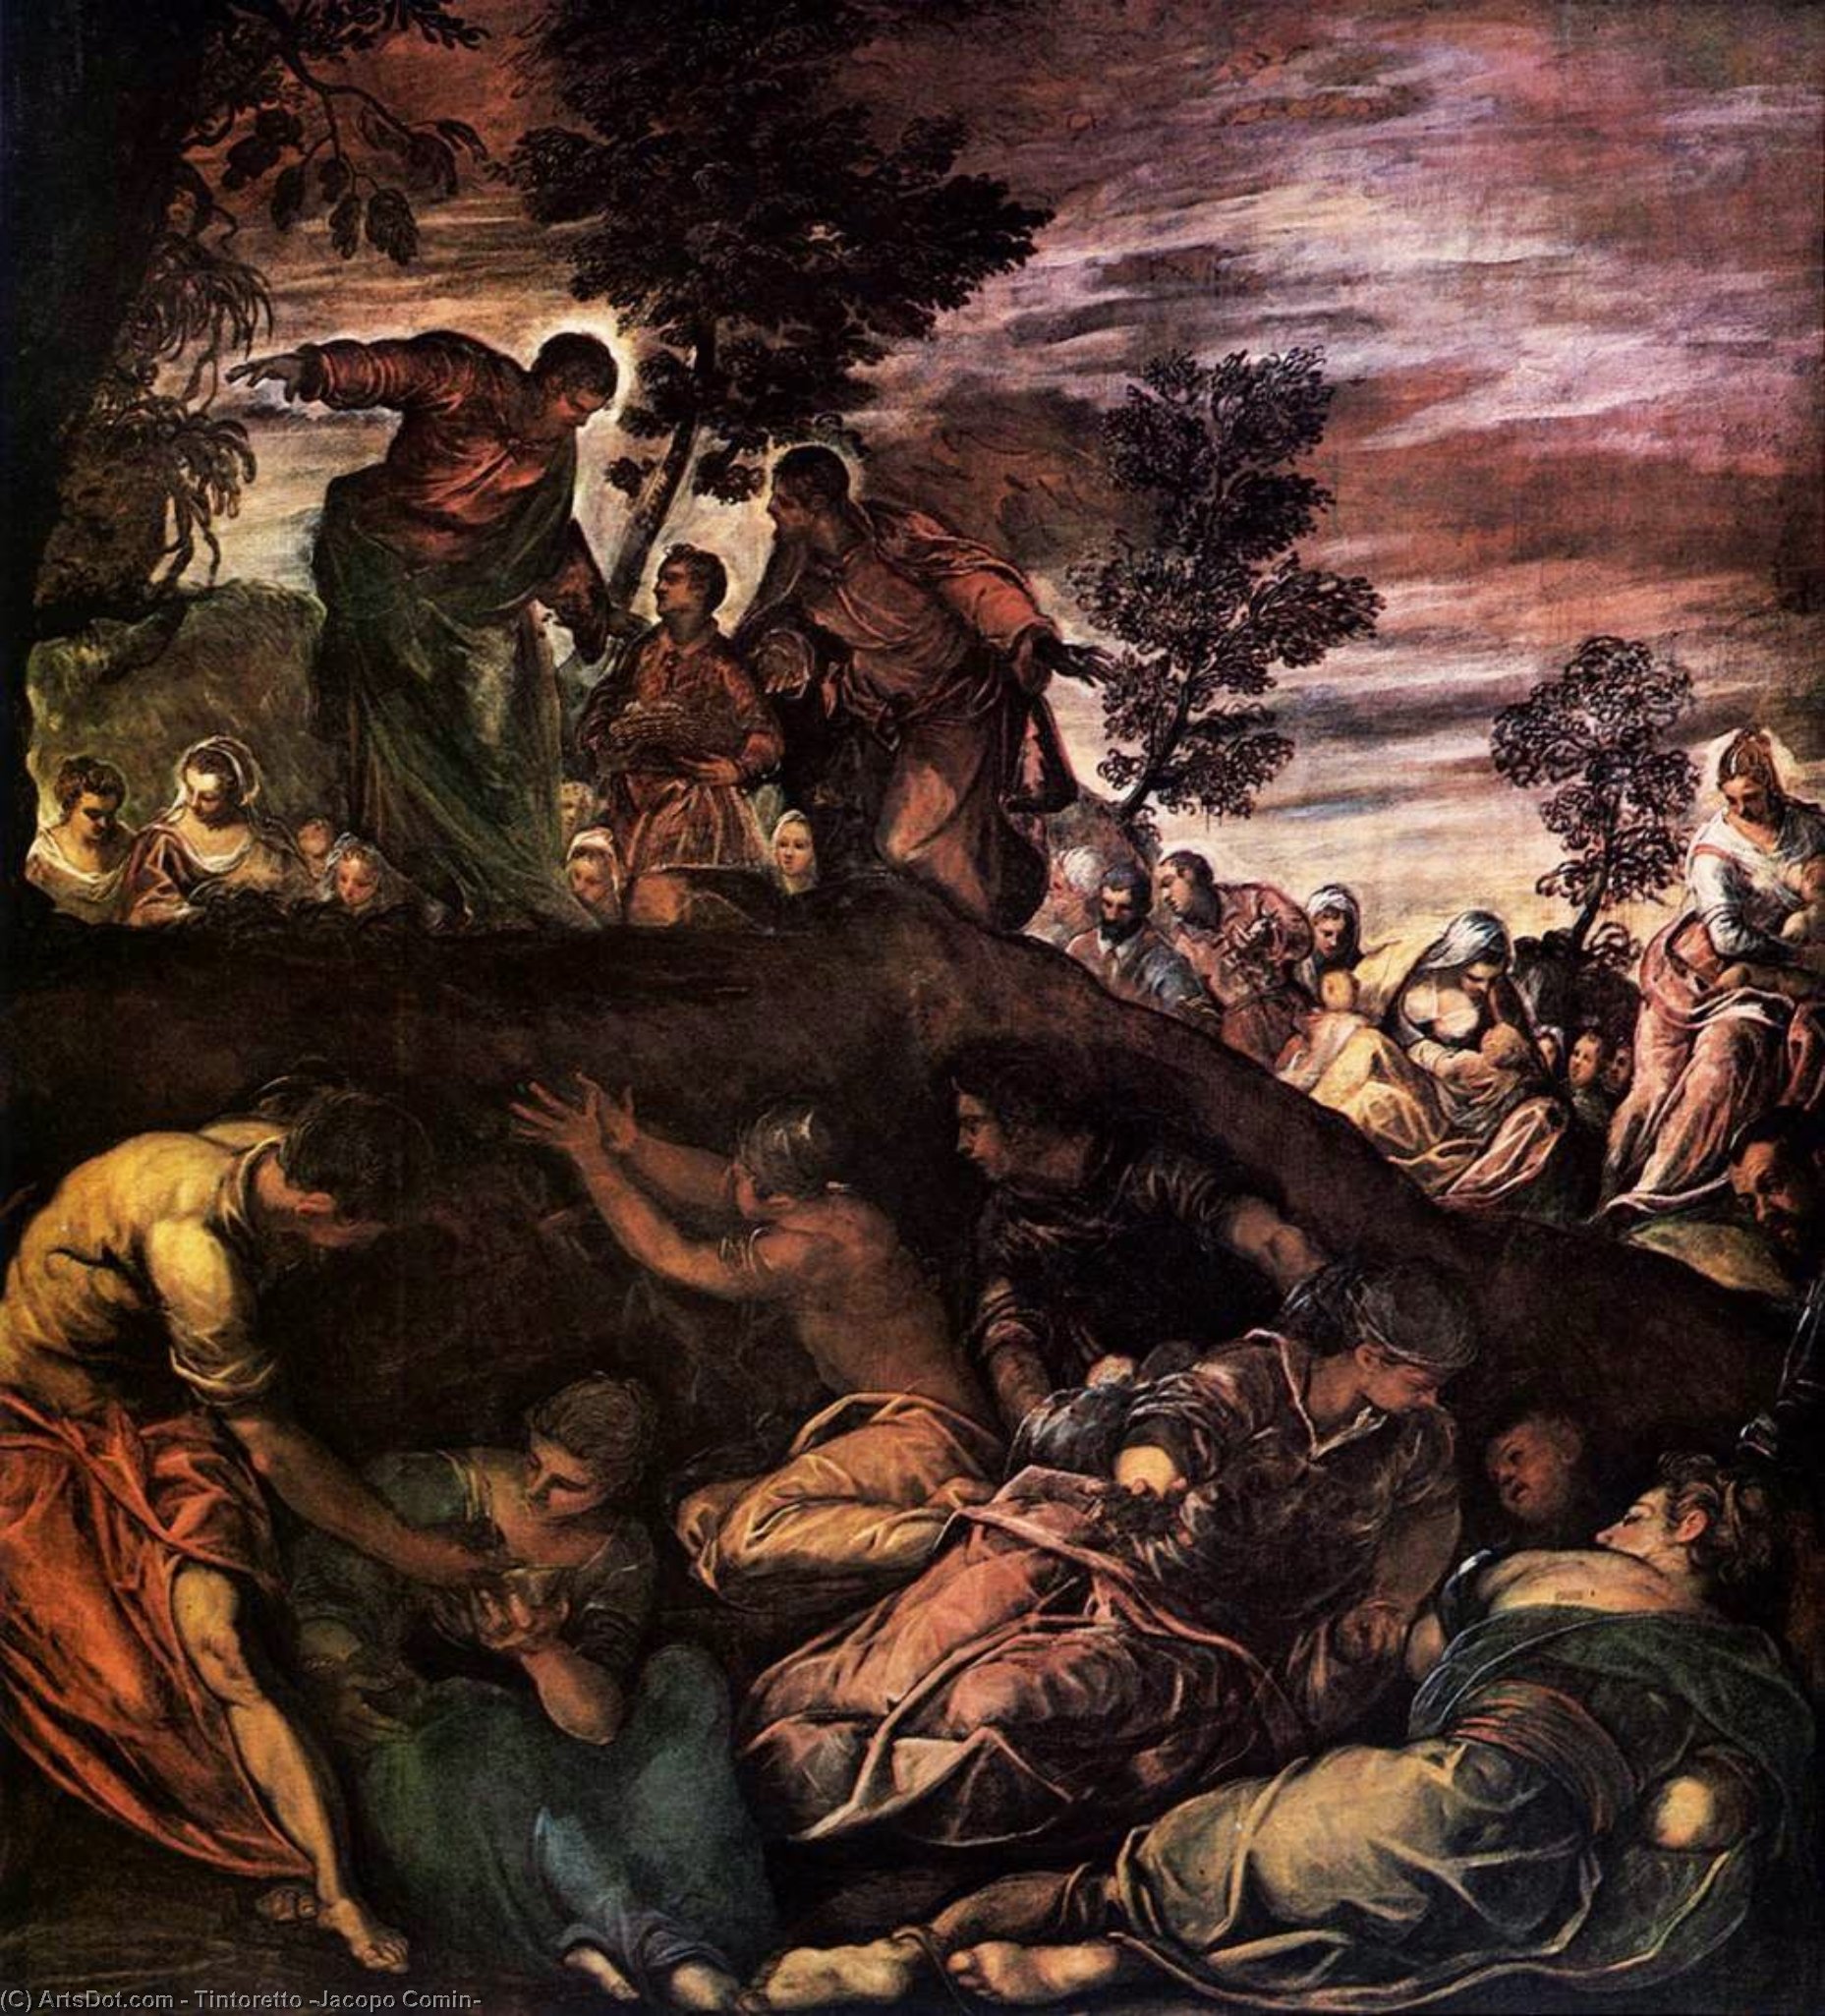 WikiOO.org - Encyclopedia of Fine Arts - Lukisan, Artwork Tintoretto (Jacopo Comin) - The Miracle of the Loaves and Fishes